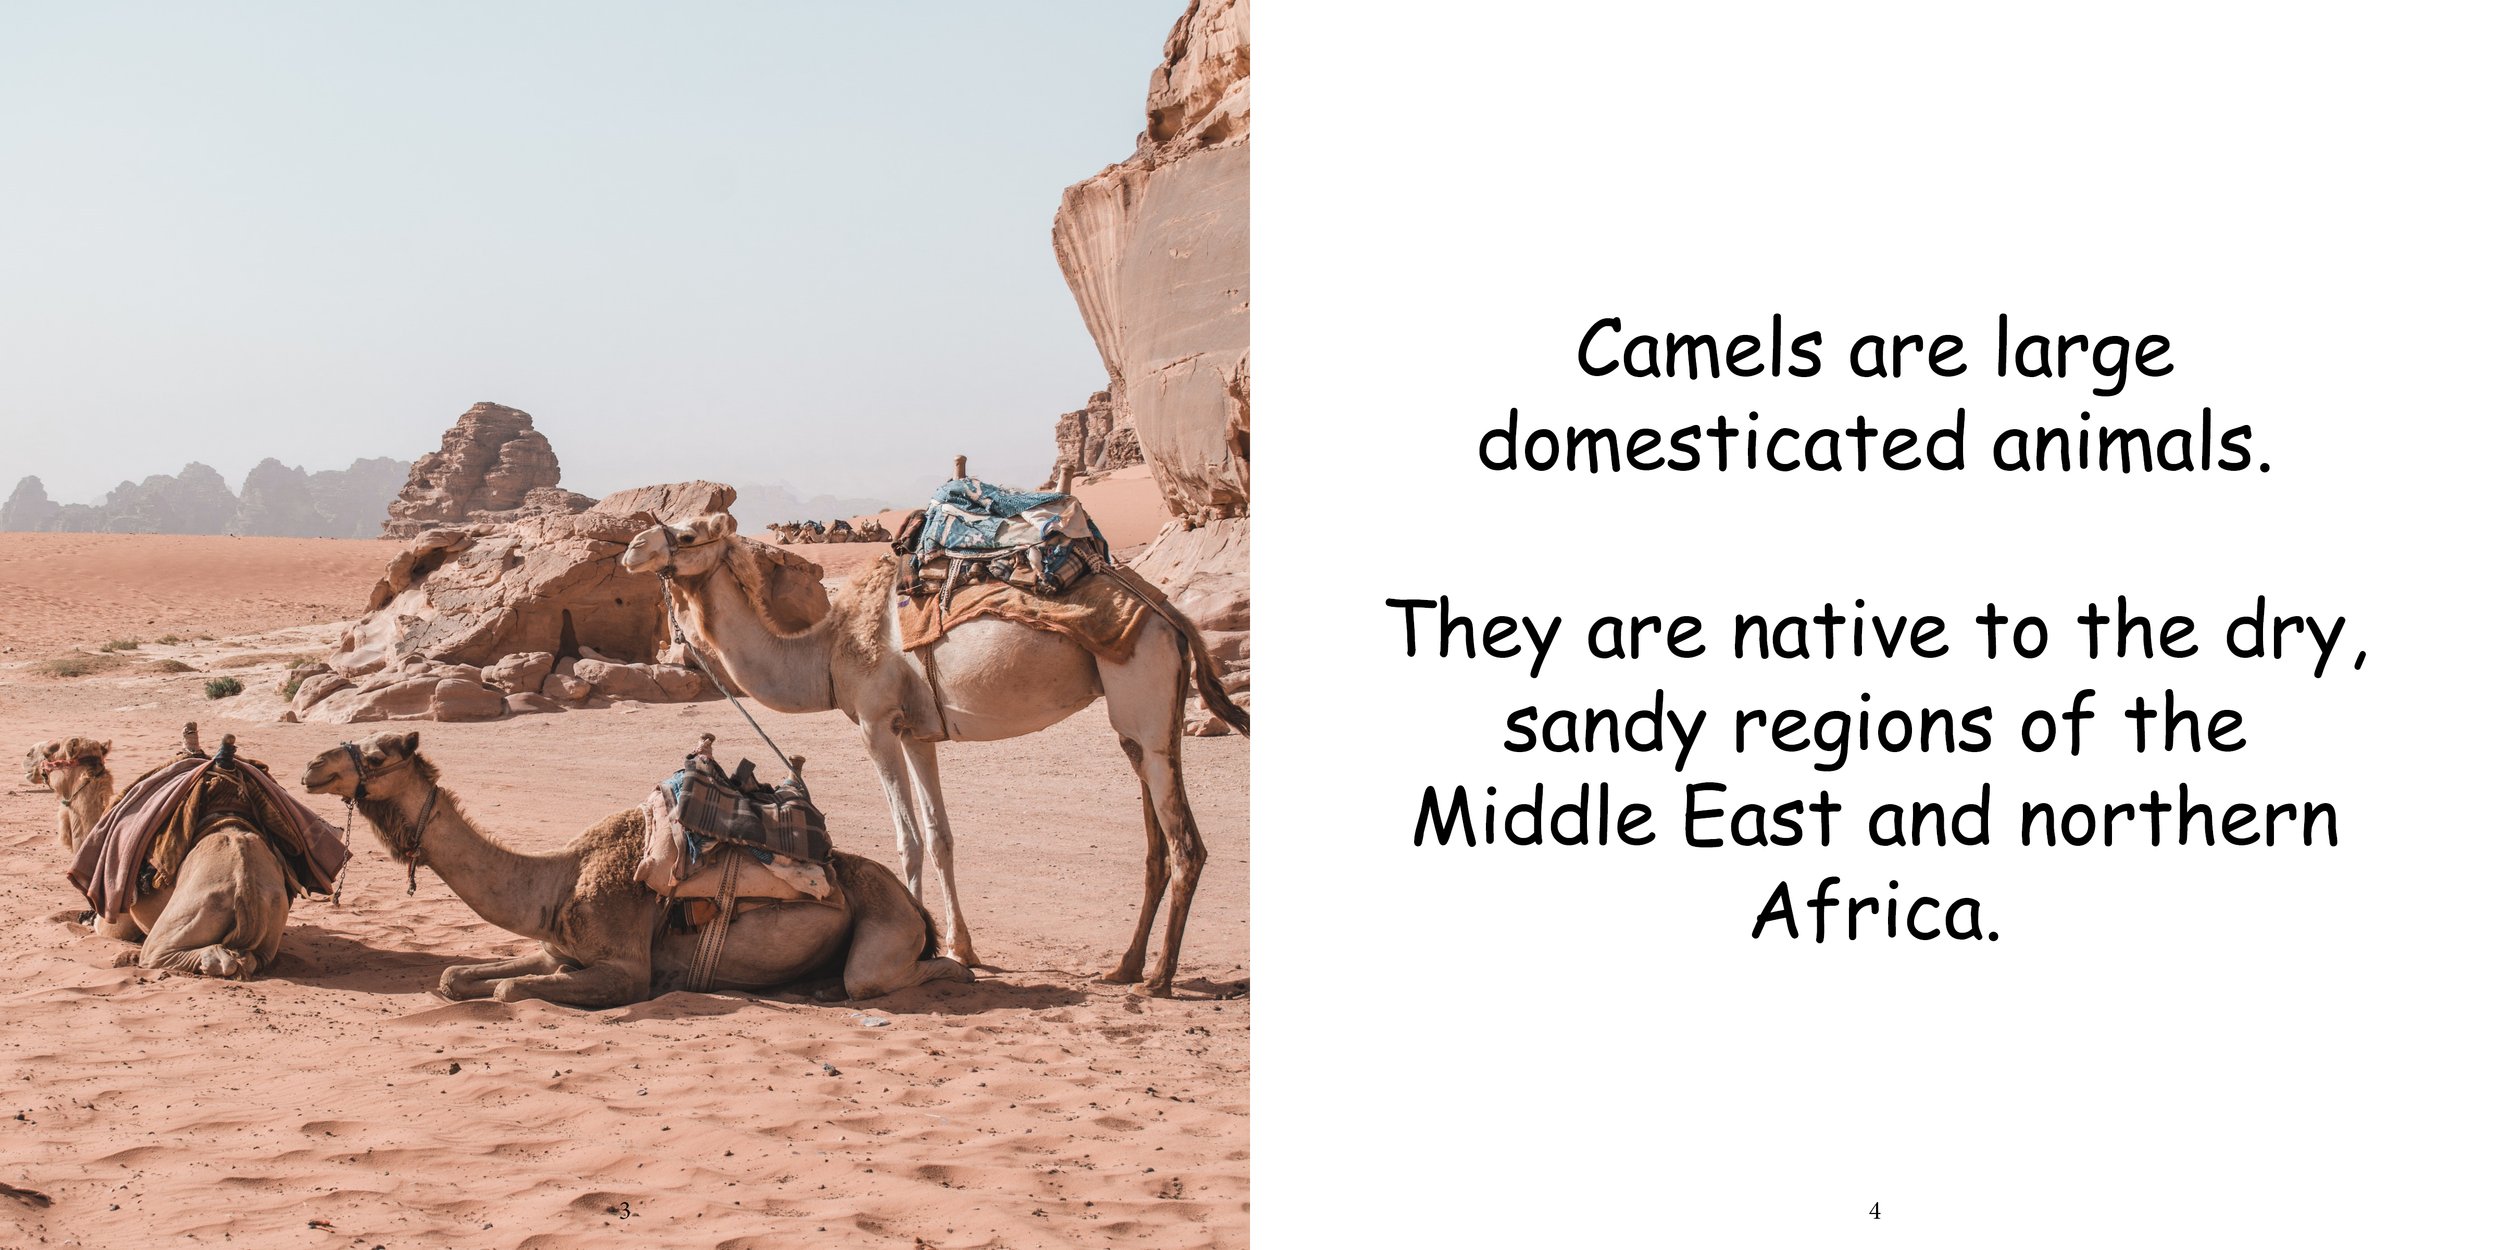 Everything about Camels6.jpg